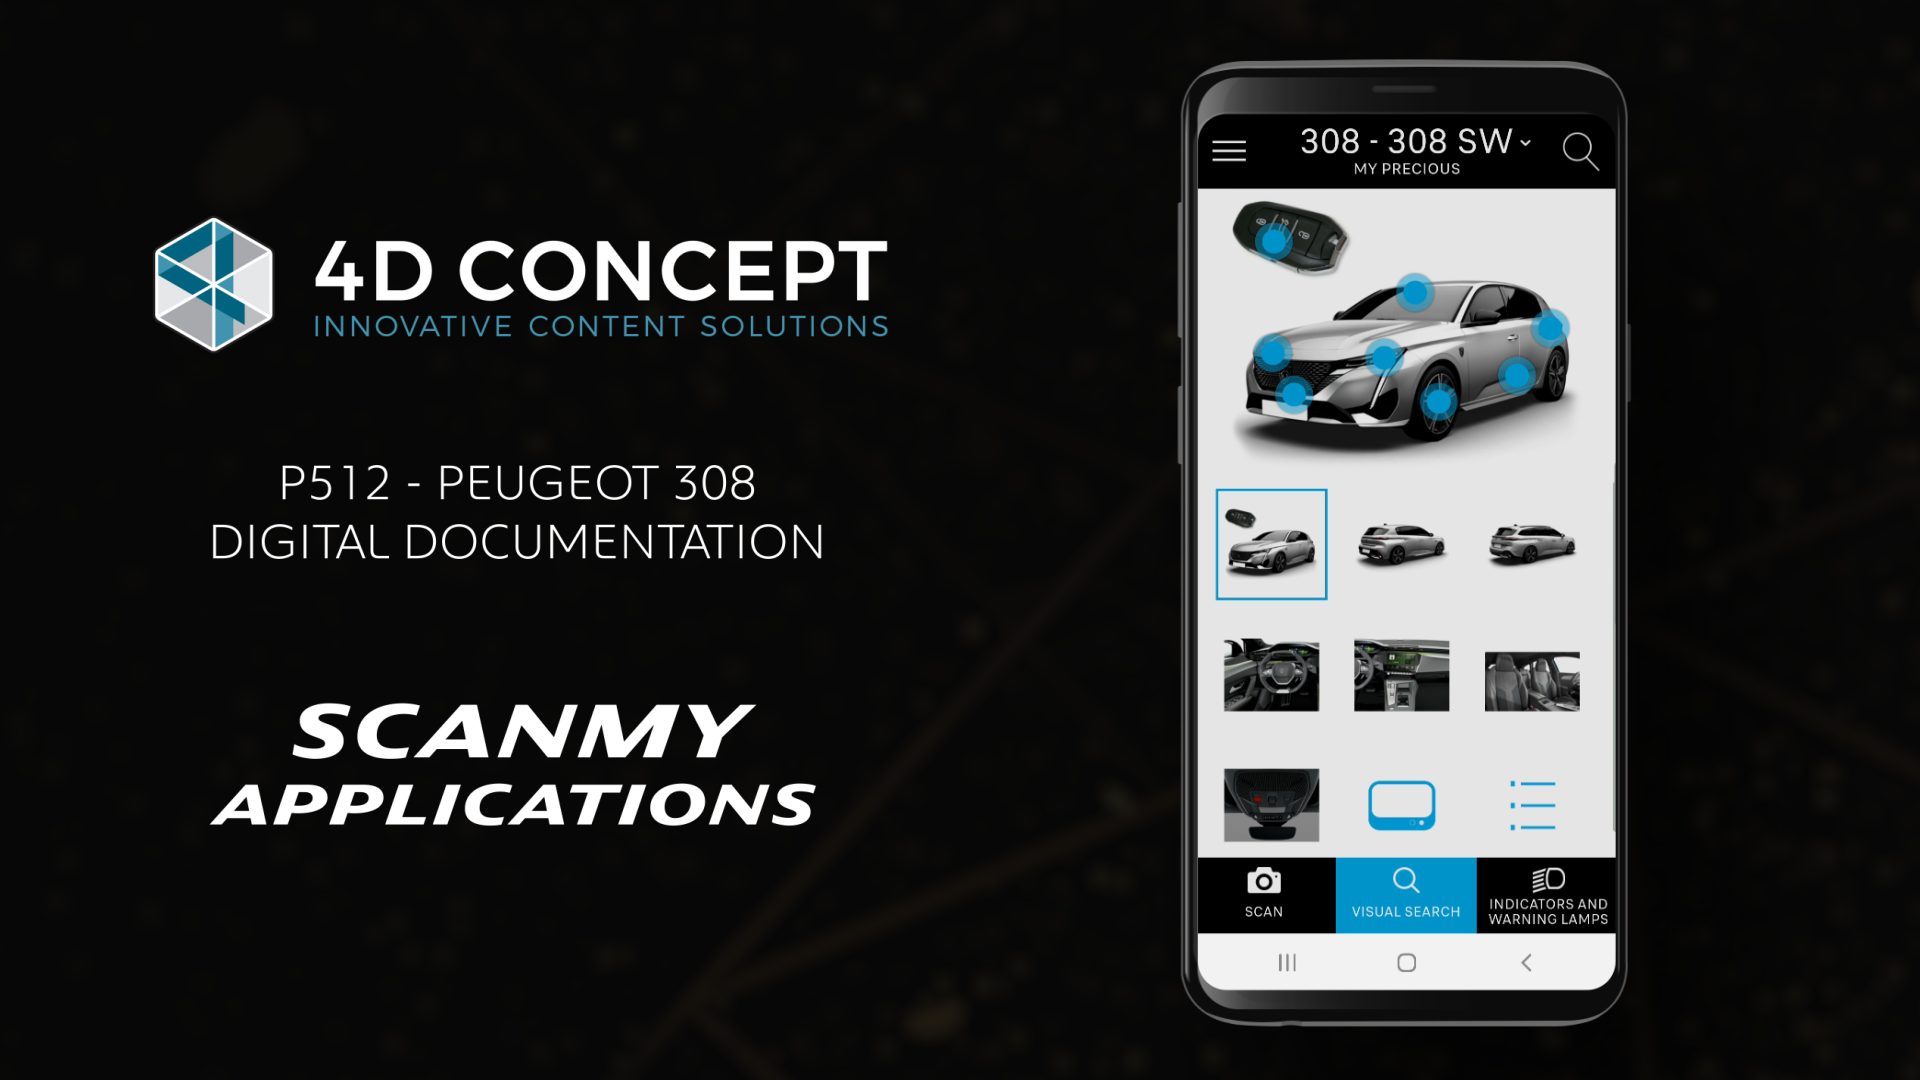 video_scanMY_4DConcept